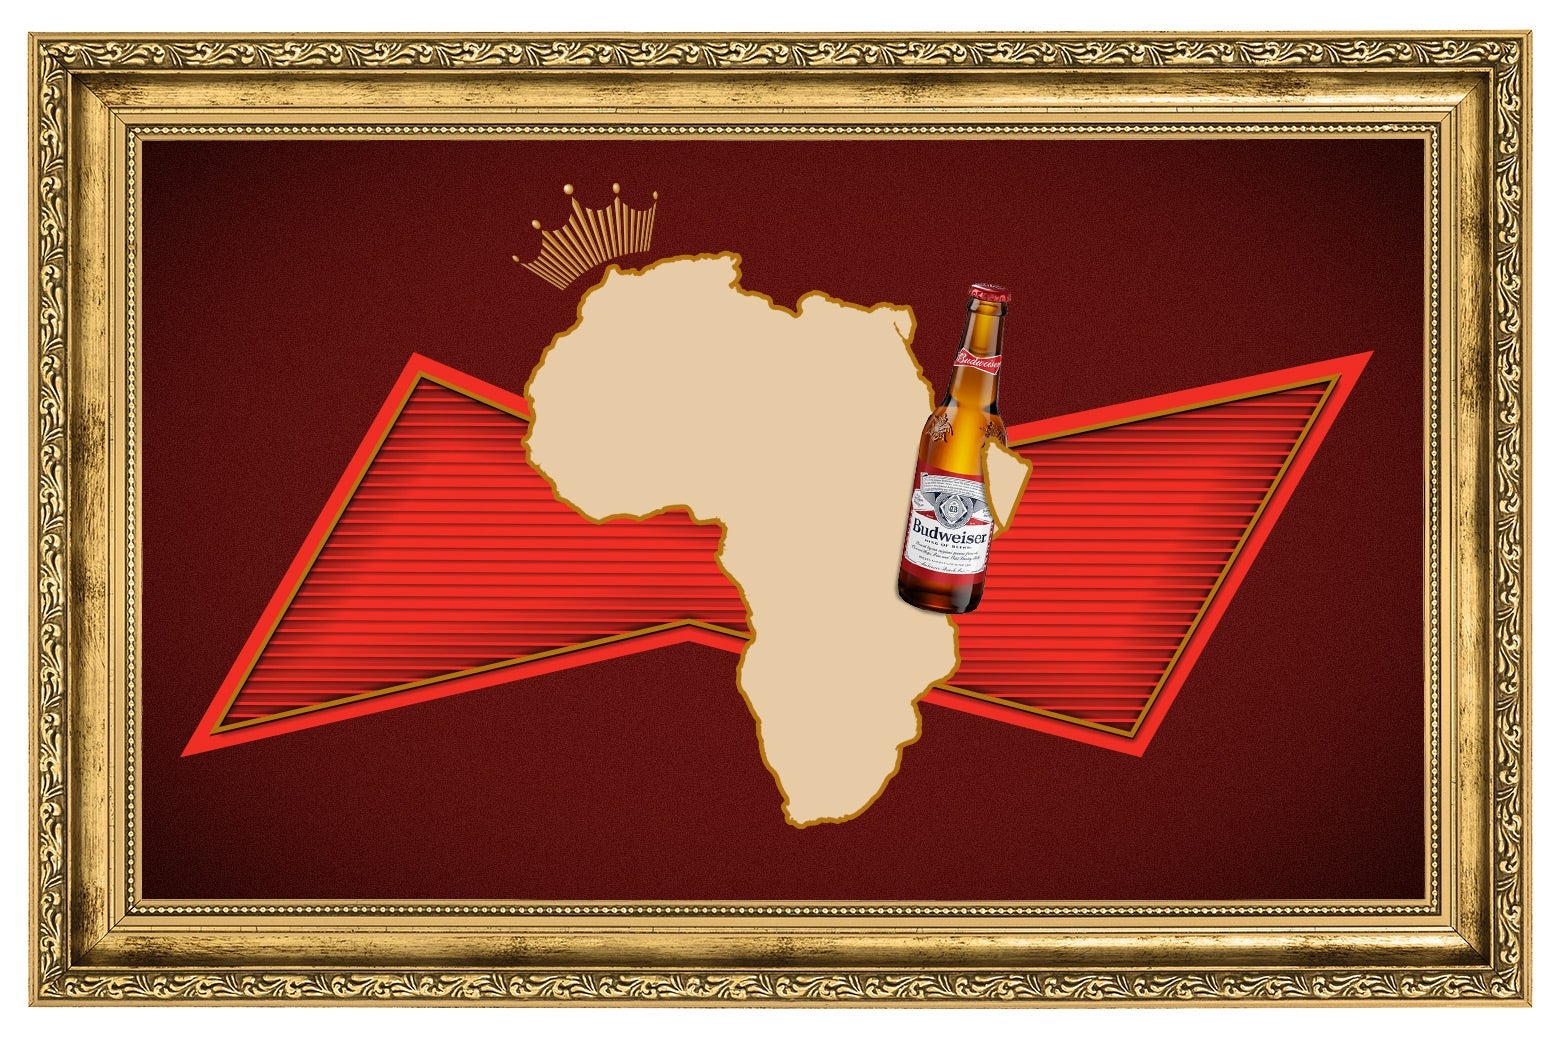 Silhouette of the continent of Africa wearing a crown and holding a bottle of beer over the Budweiser logo set in a golden frame